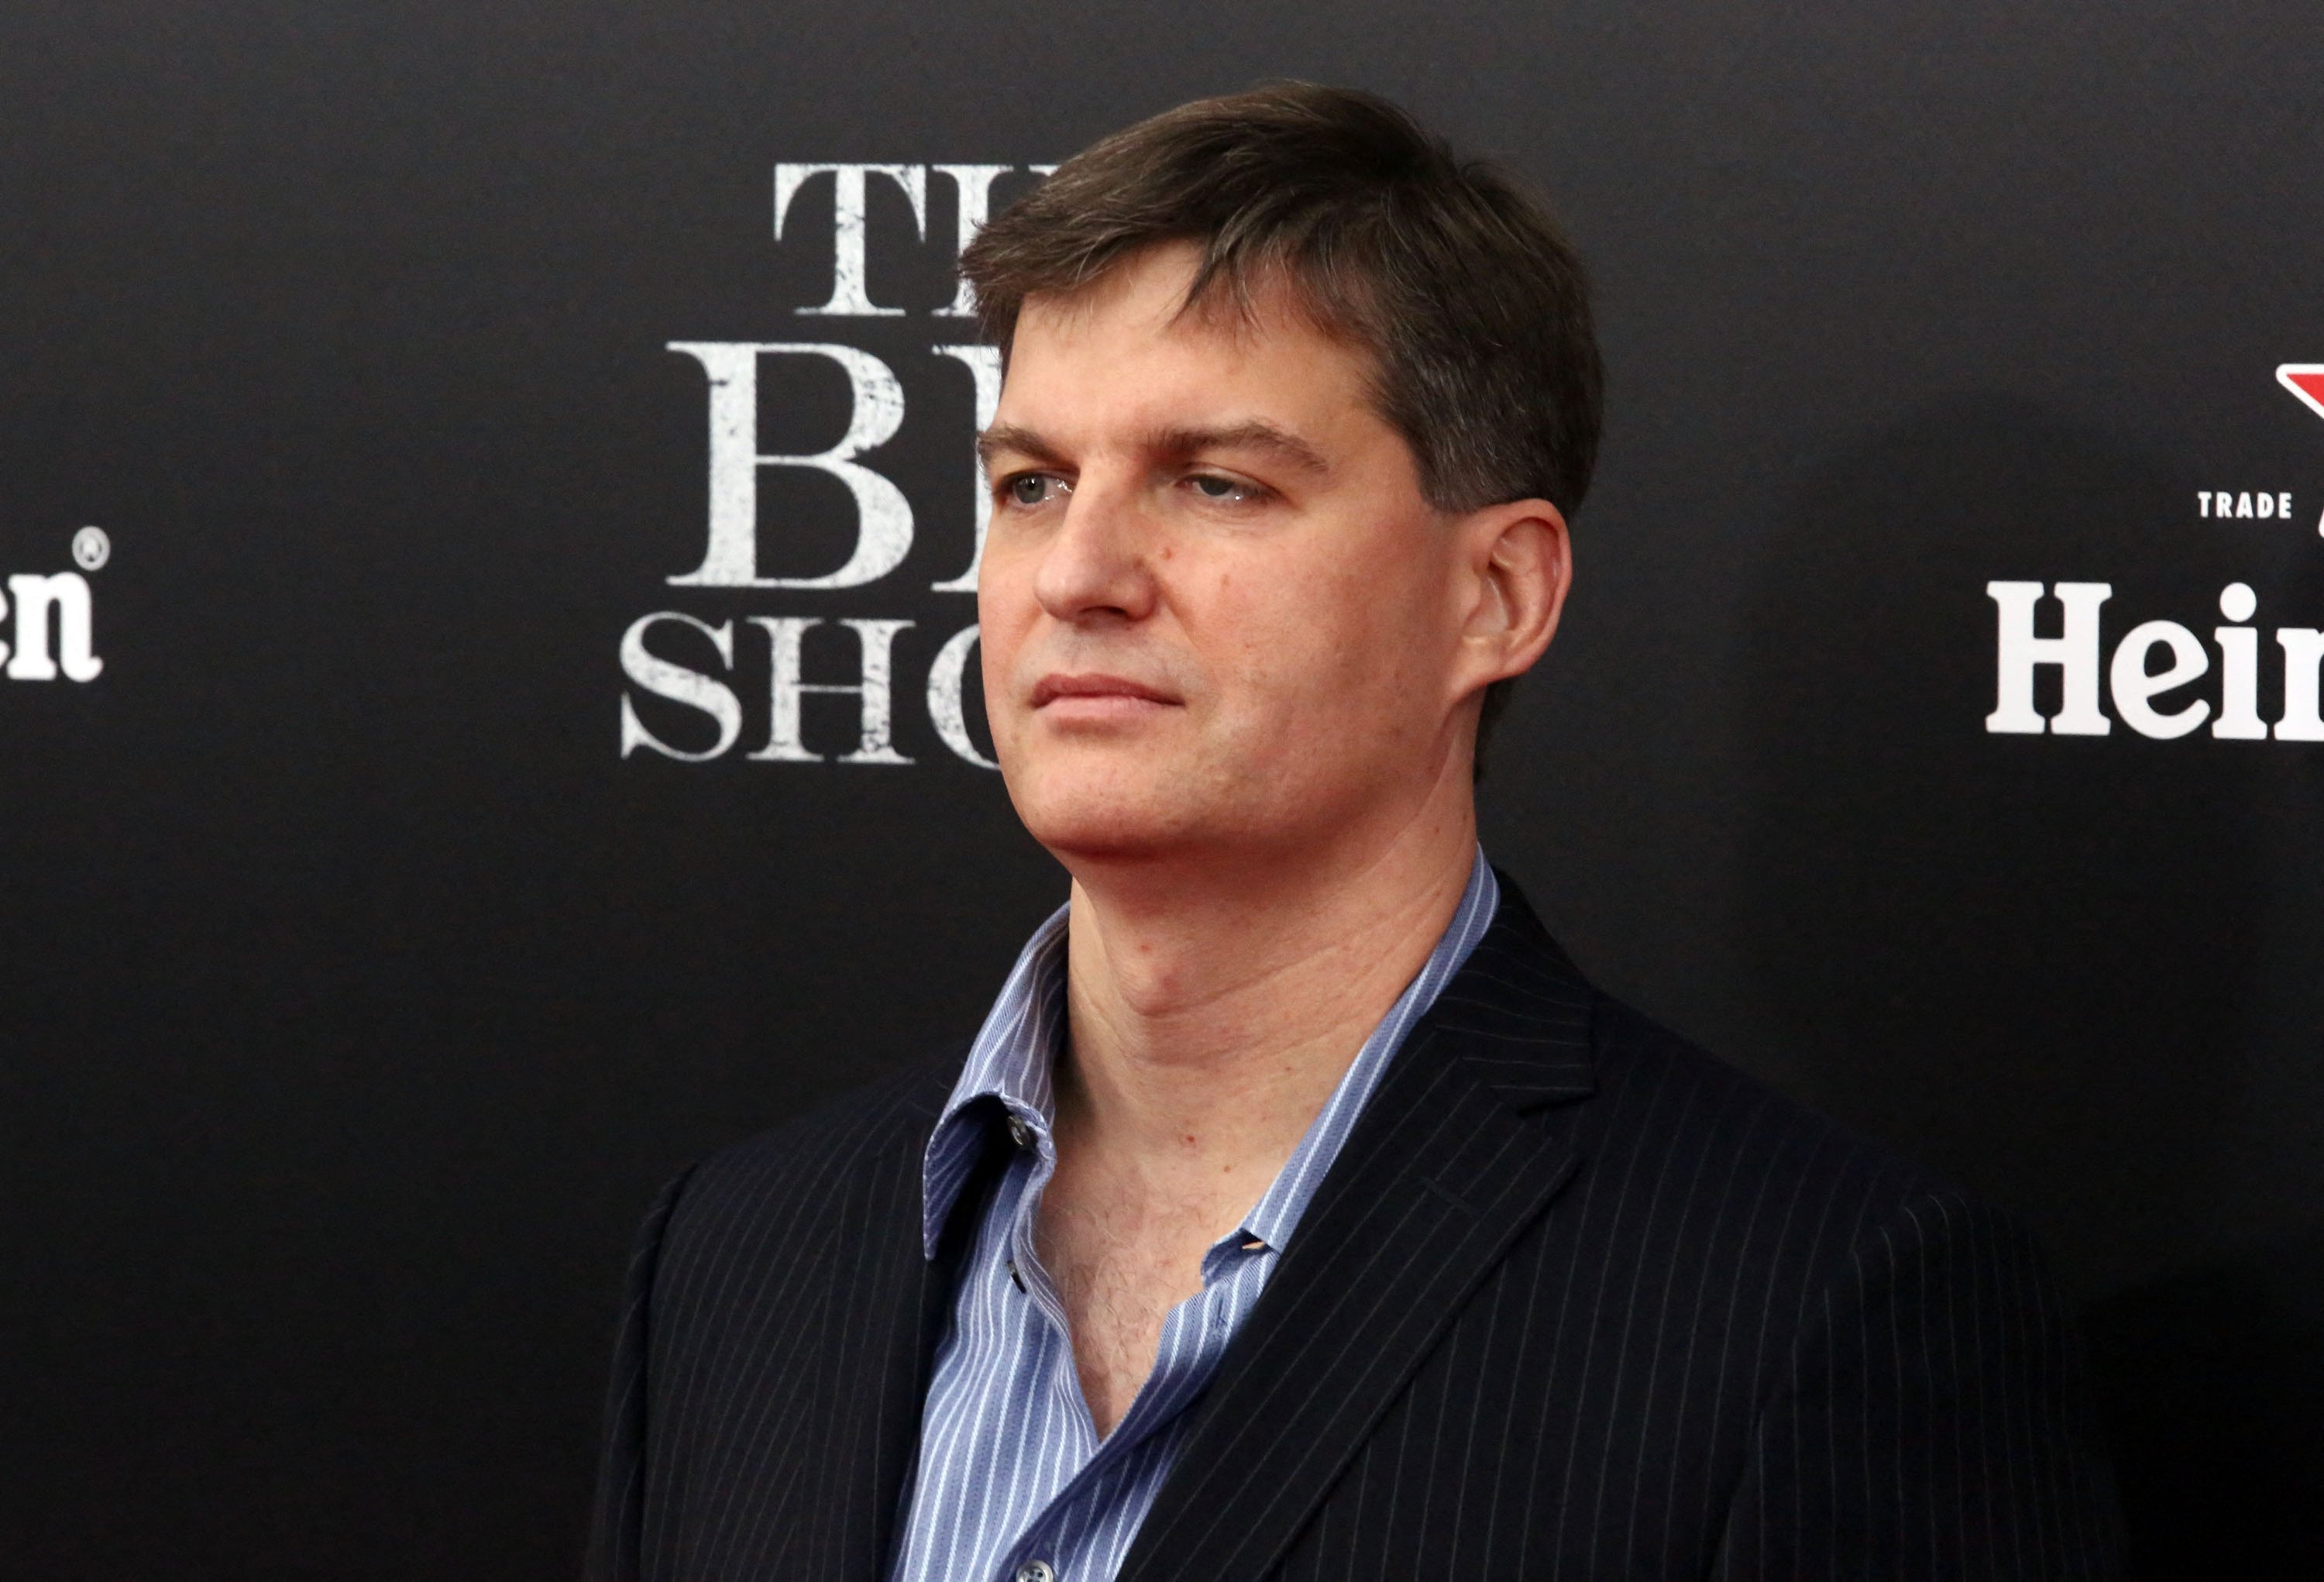 Michael Burry attends a screening of ‘The Big Short’ in New York in this file photo from November 2015. Burry increased his stake in JD.com by 233 per cent and doubled his bet on Alibaba in the first quarter of this year. Photo: AFP